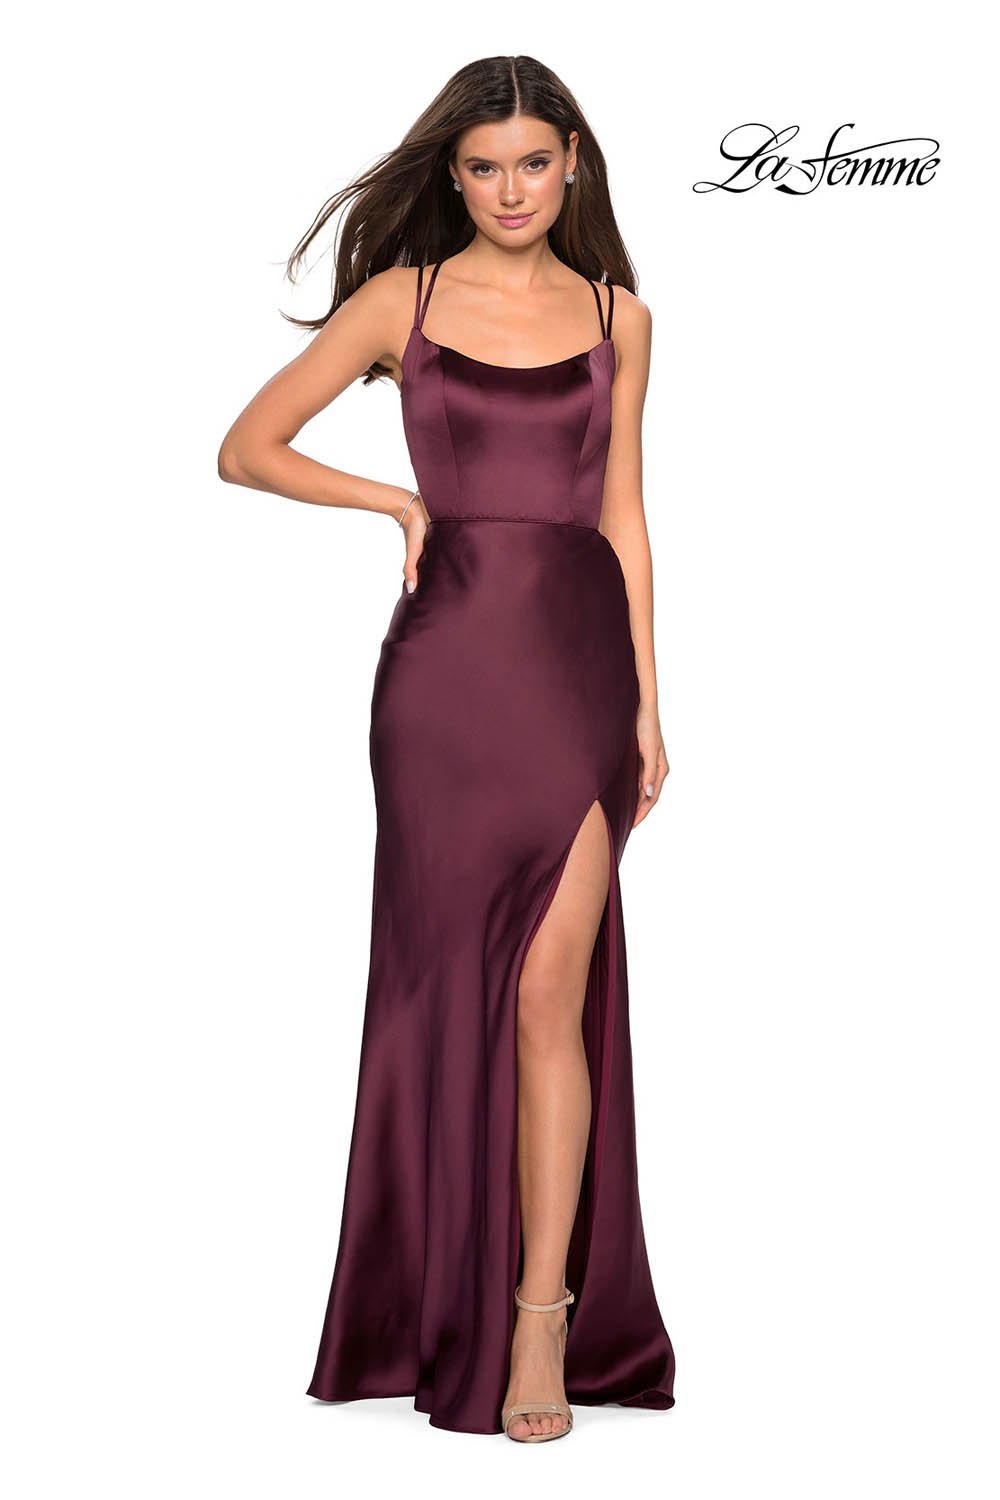 La Femme 27010 dress images in these colors: Blush, Navy, Wine.